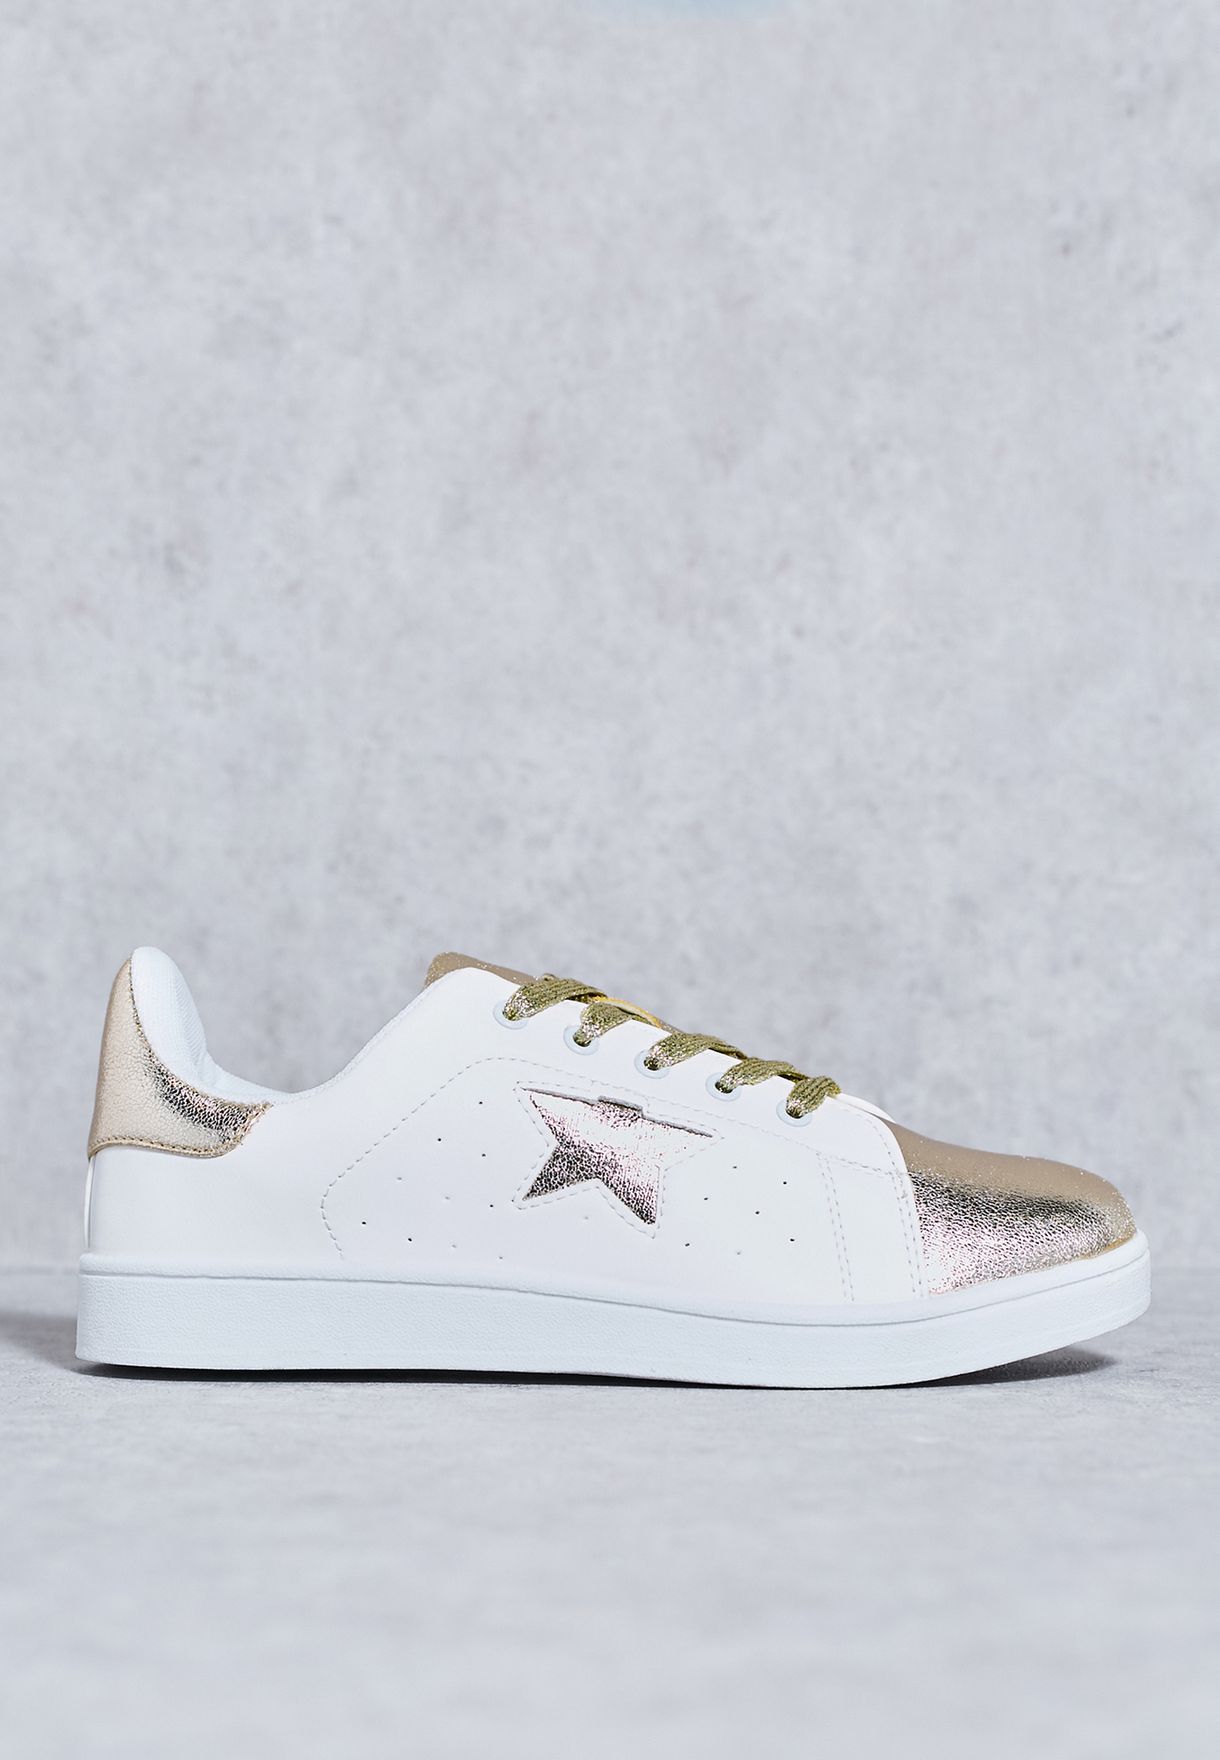 shoes with star on the side